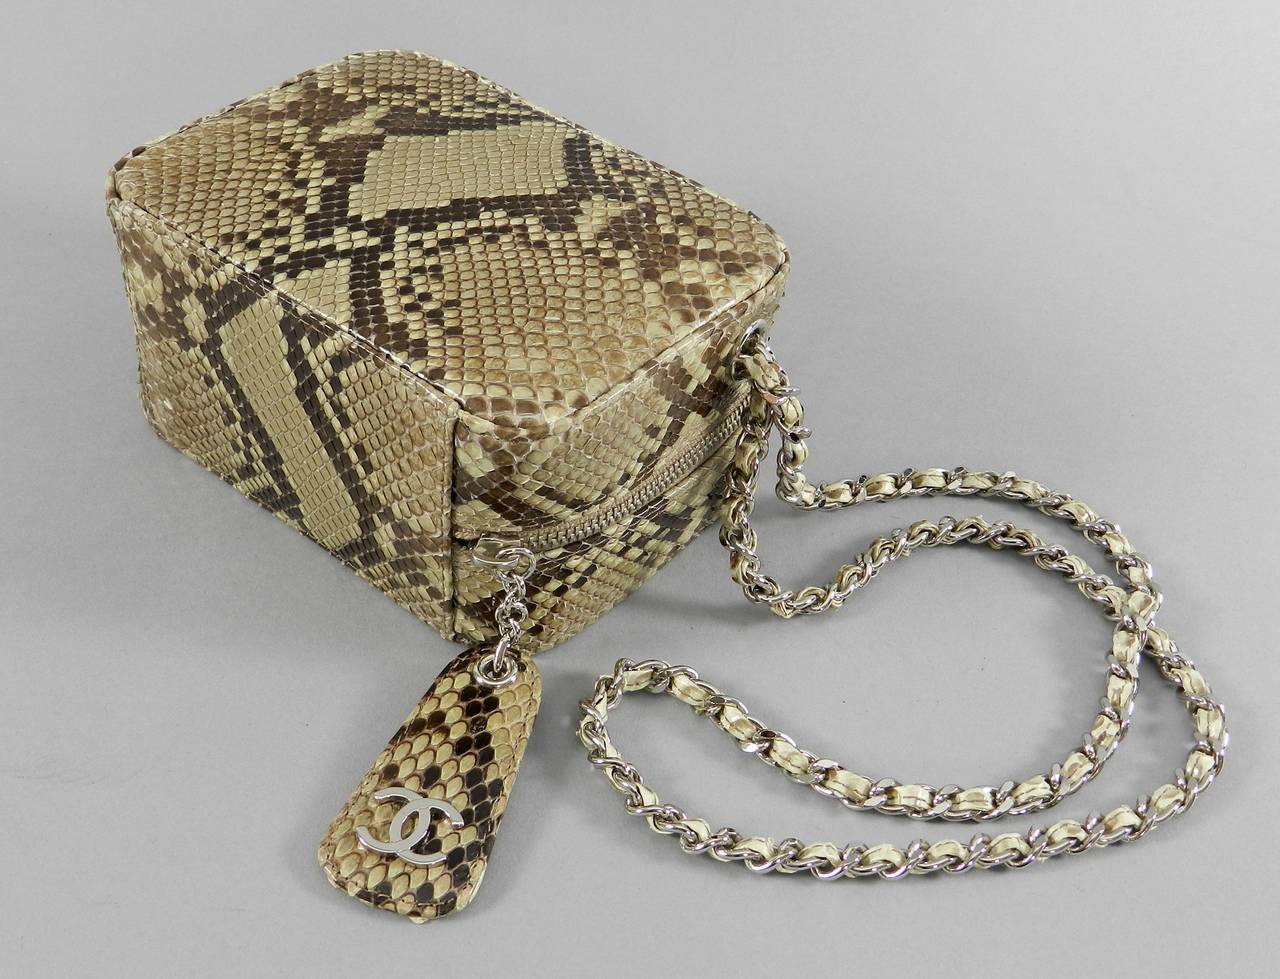 Chanel vintage 2000 fall runway collection python box wristlet bag. Still has original tags and was never used. Mint! Excellent clean condition on both interior and exterior. Silvertone hardware with CC logo zipper pull, chain looped strap, and